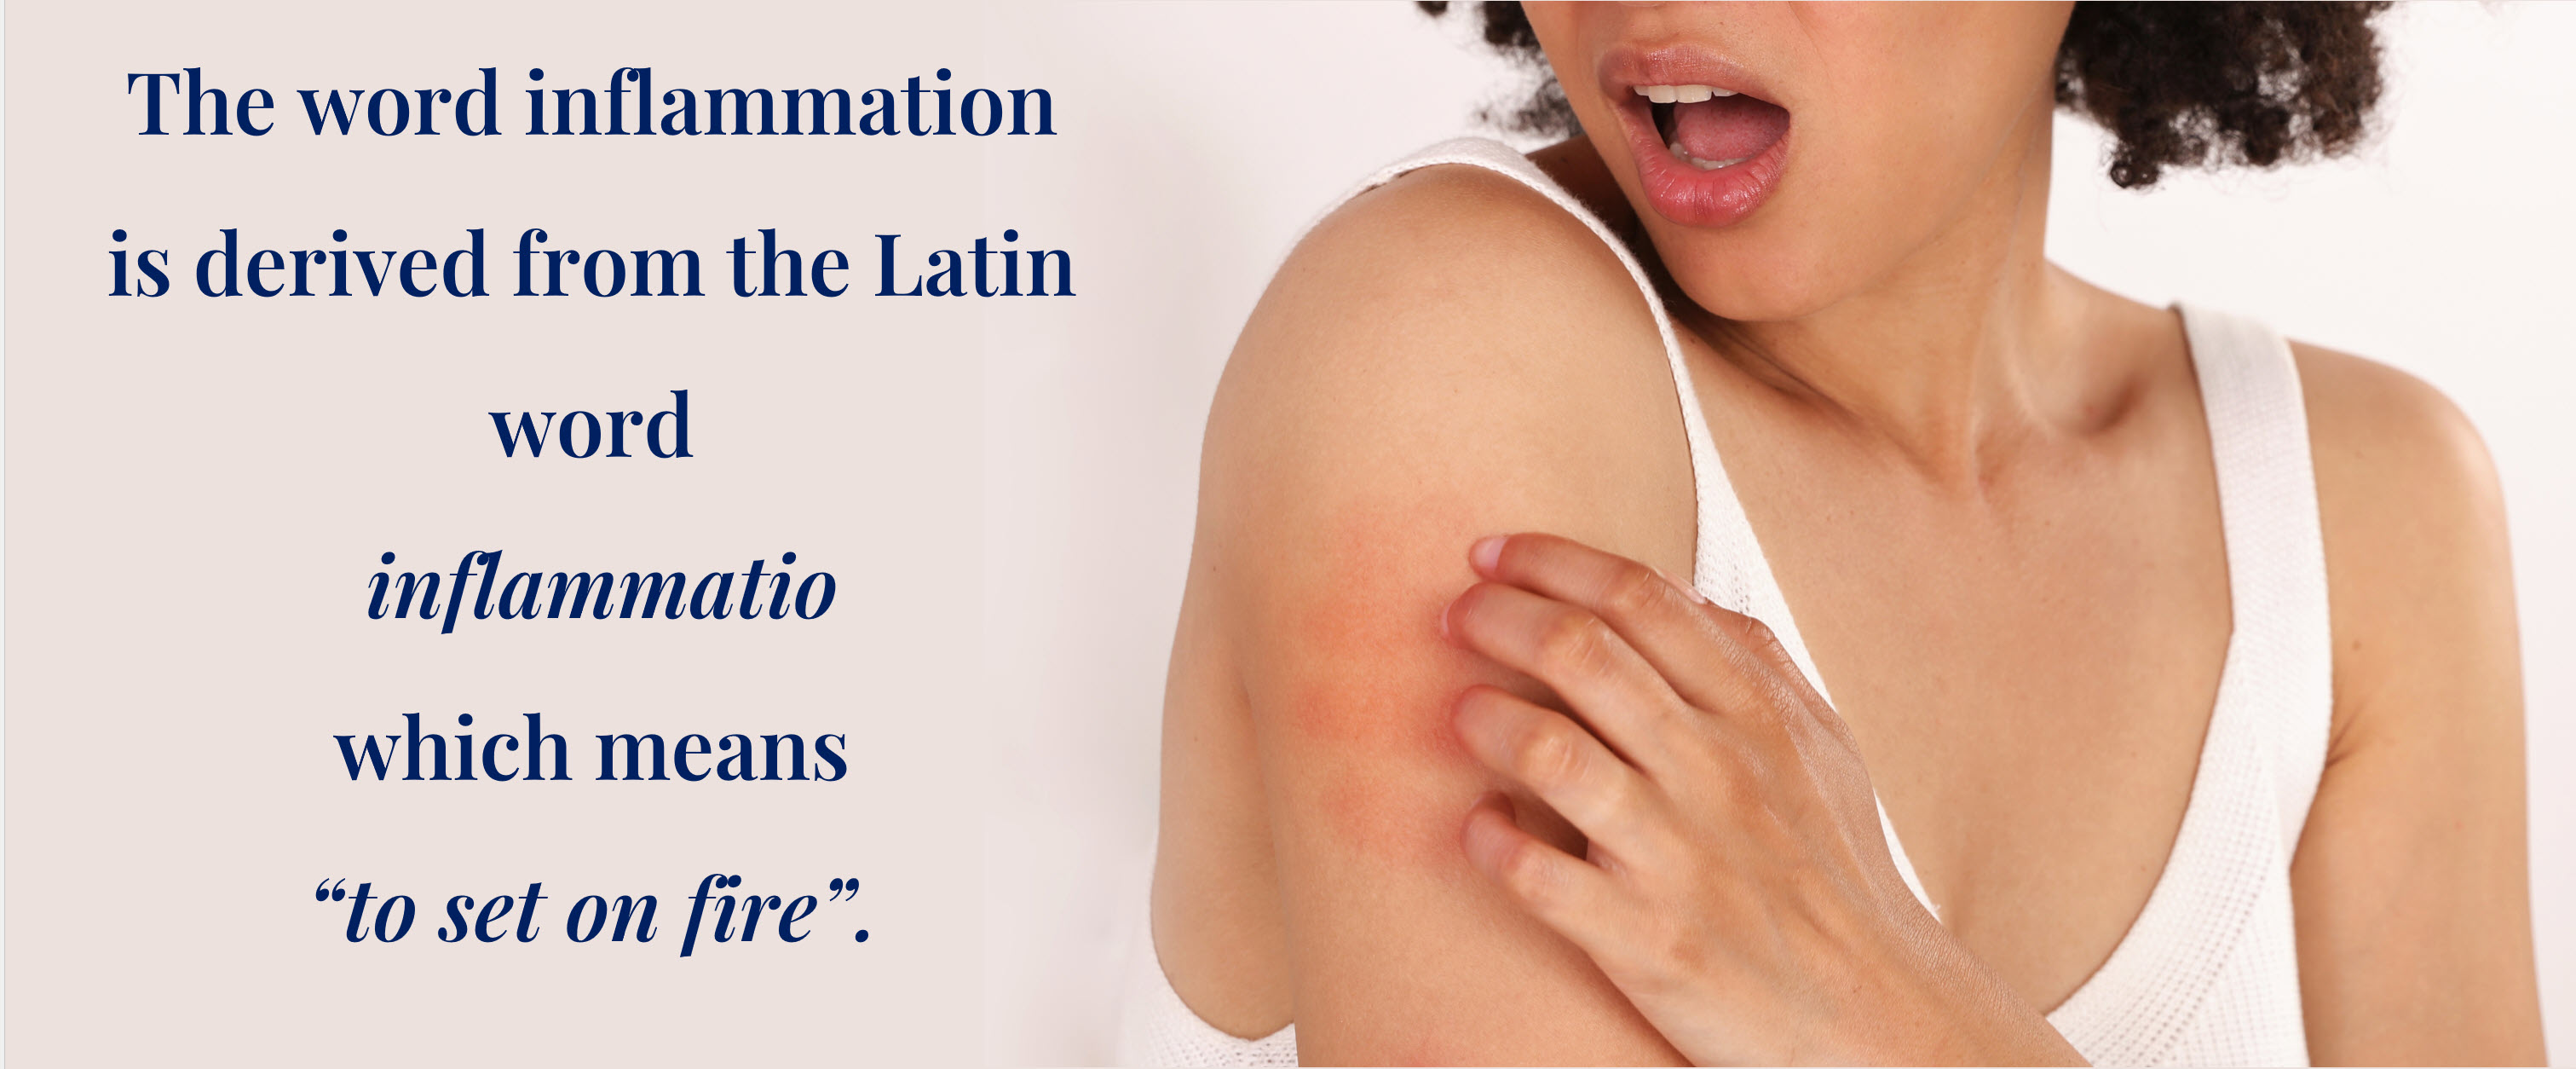 inflammation definition